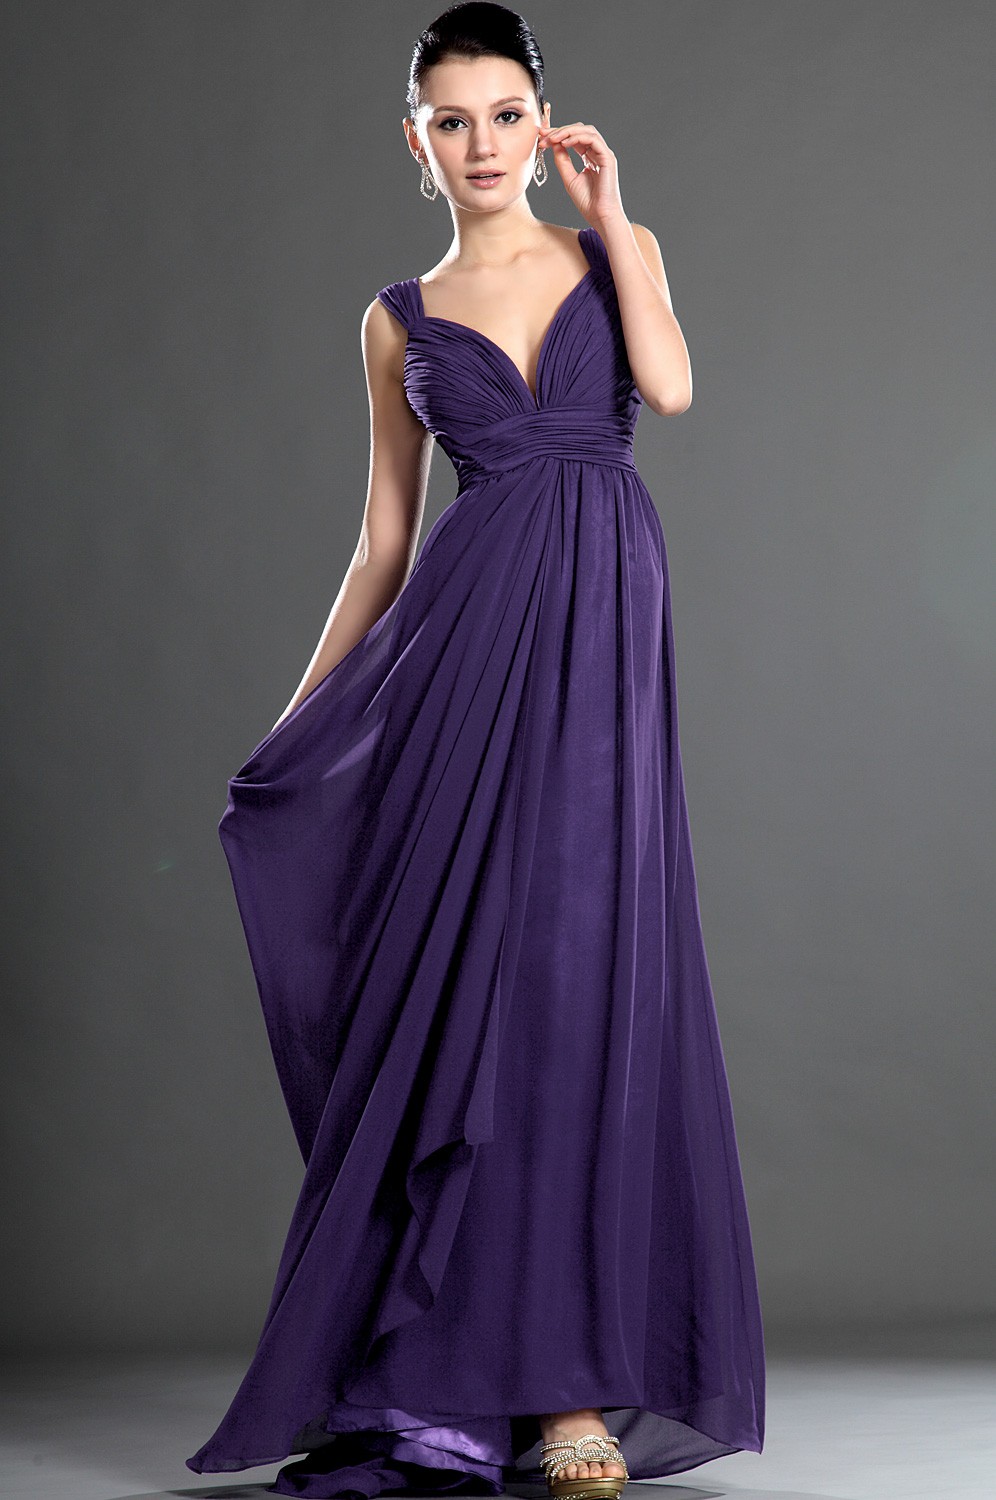 Amazing Purple Cocktail Dresses For Weddings  The ultimate guide 